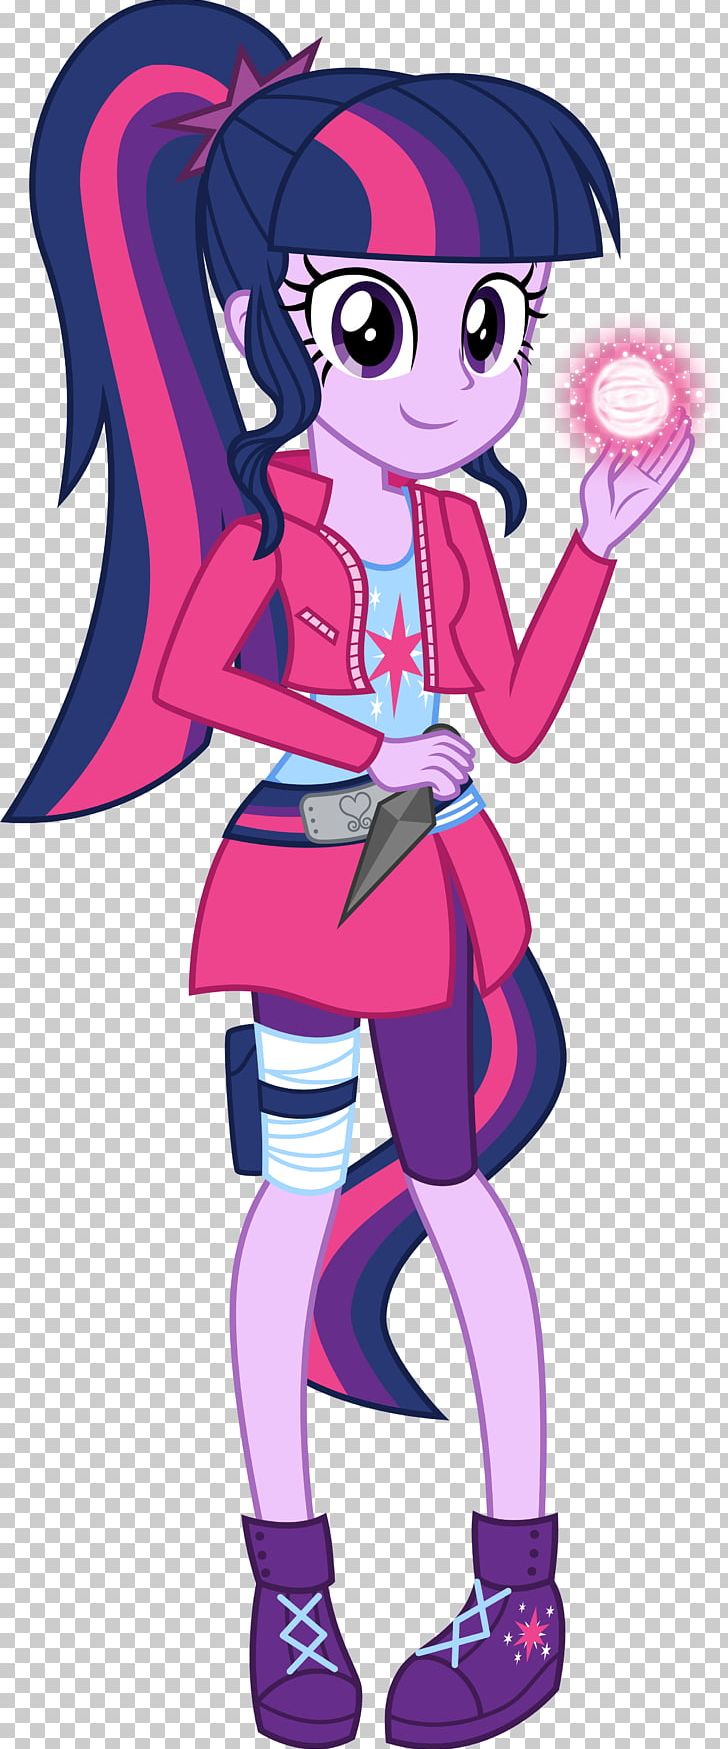 Twilight Sparkle Pinkie Pie Rarity My Little Pony: Equestria Girls The Twilight Saga PNG, Clipart, Art, Cartoon, Clothing, Costume, Deviantart Free PNG Download